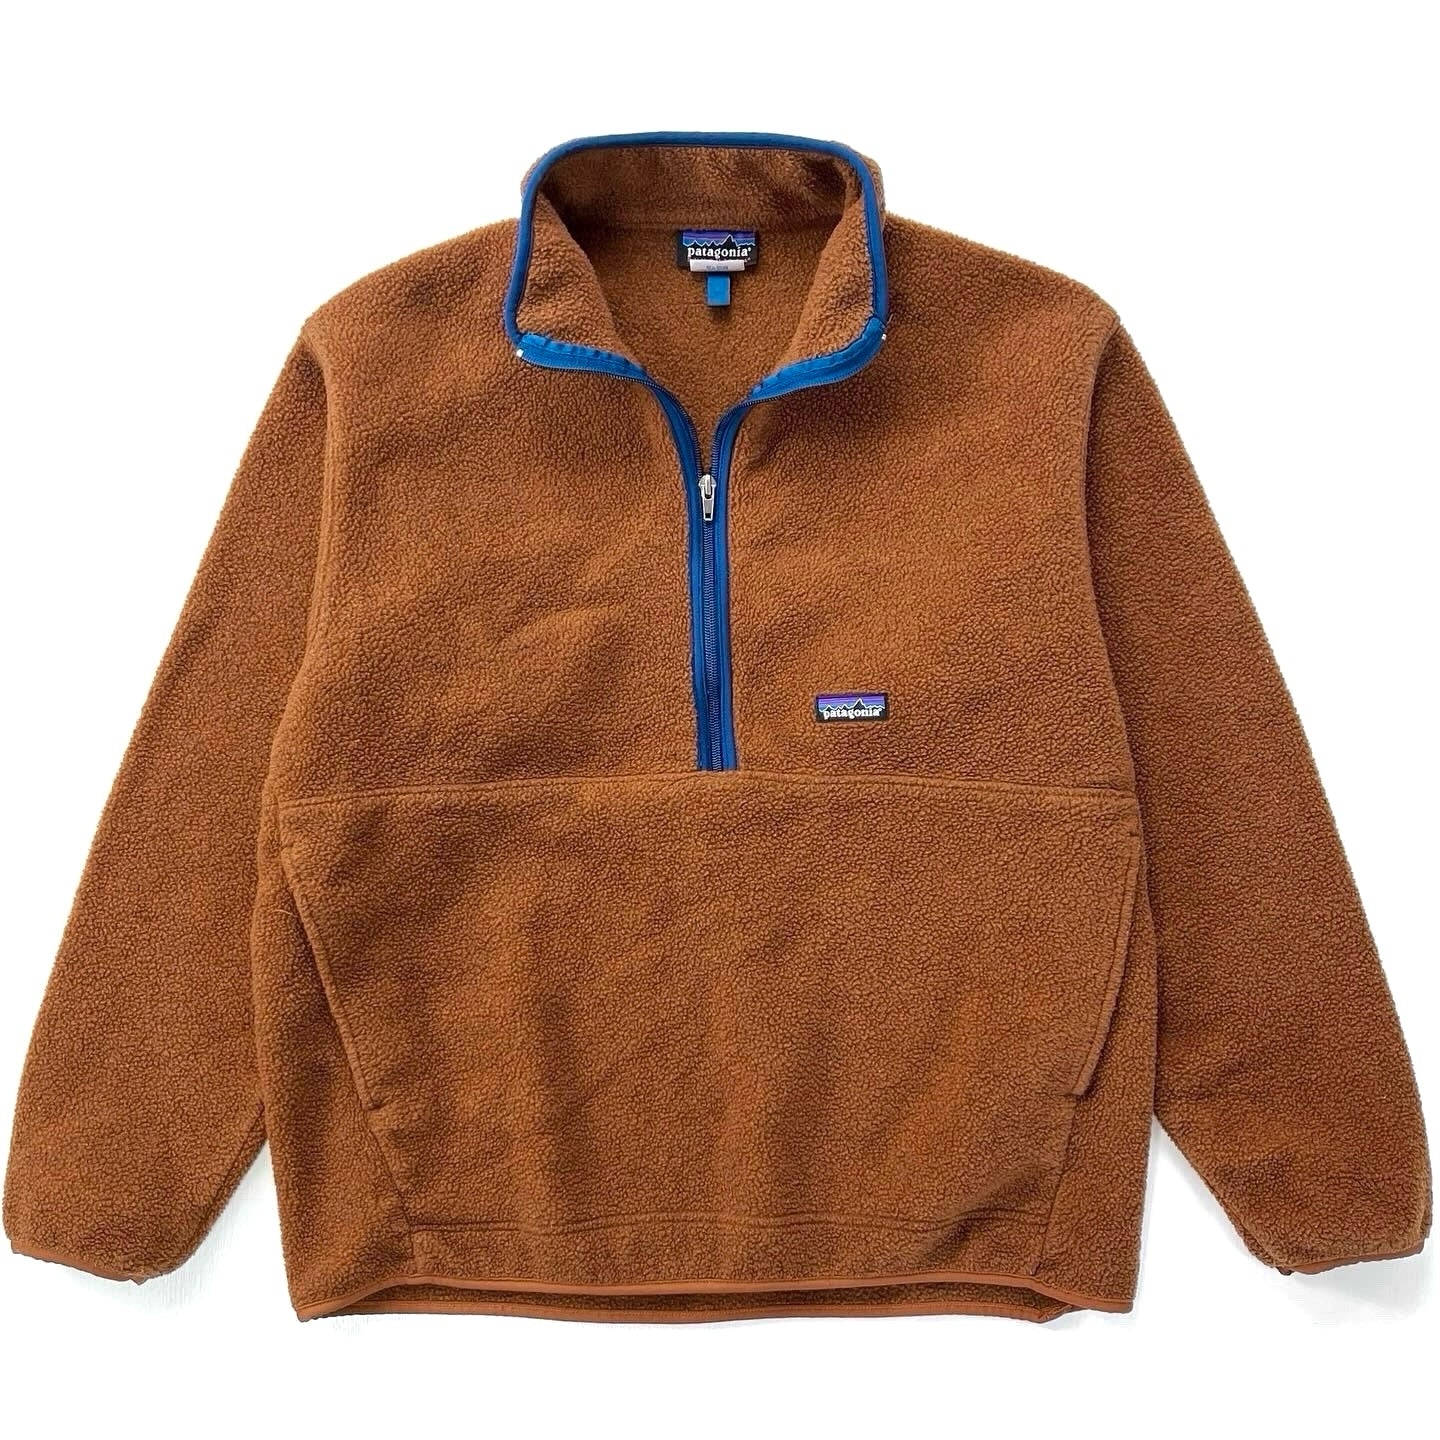 2005 Patagonia Synchilla Marsupial Pullover, Russet Brown (L)